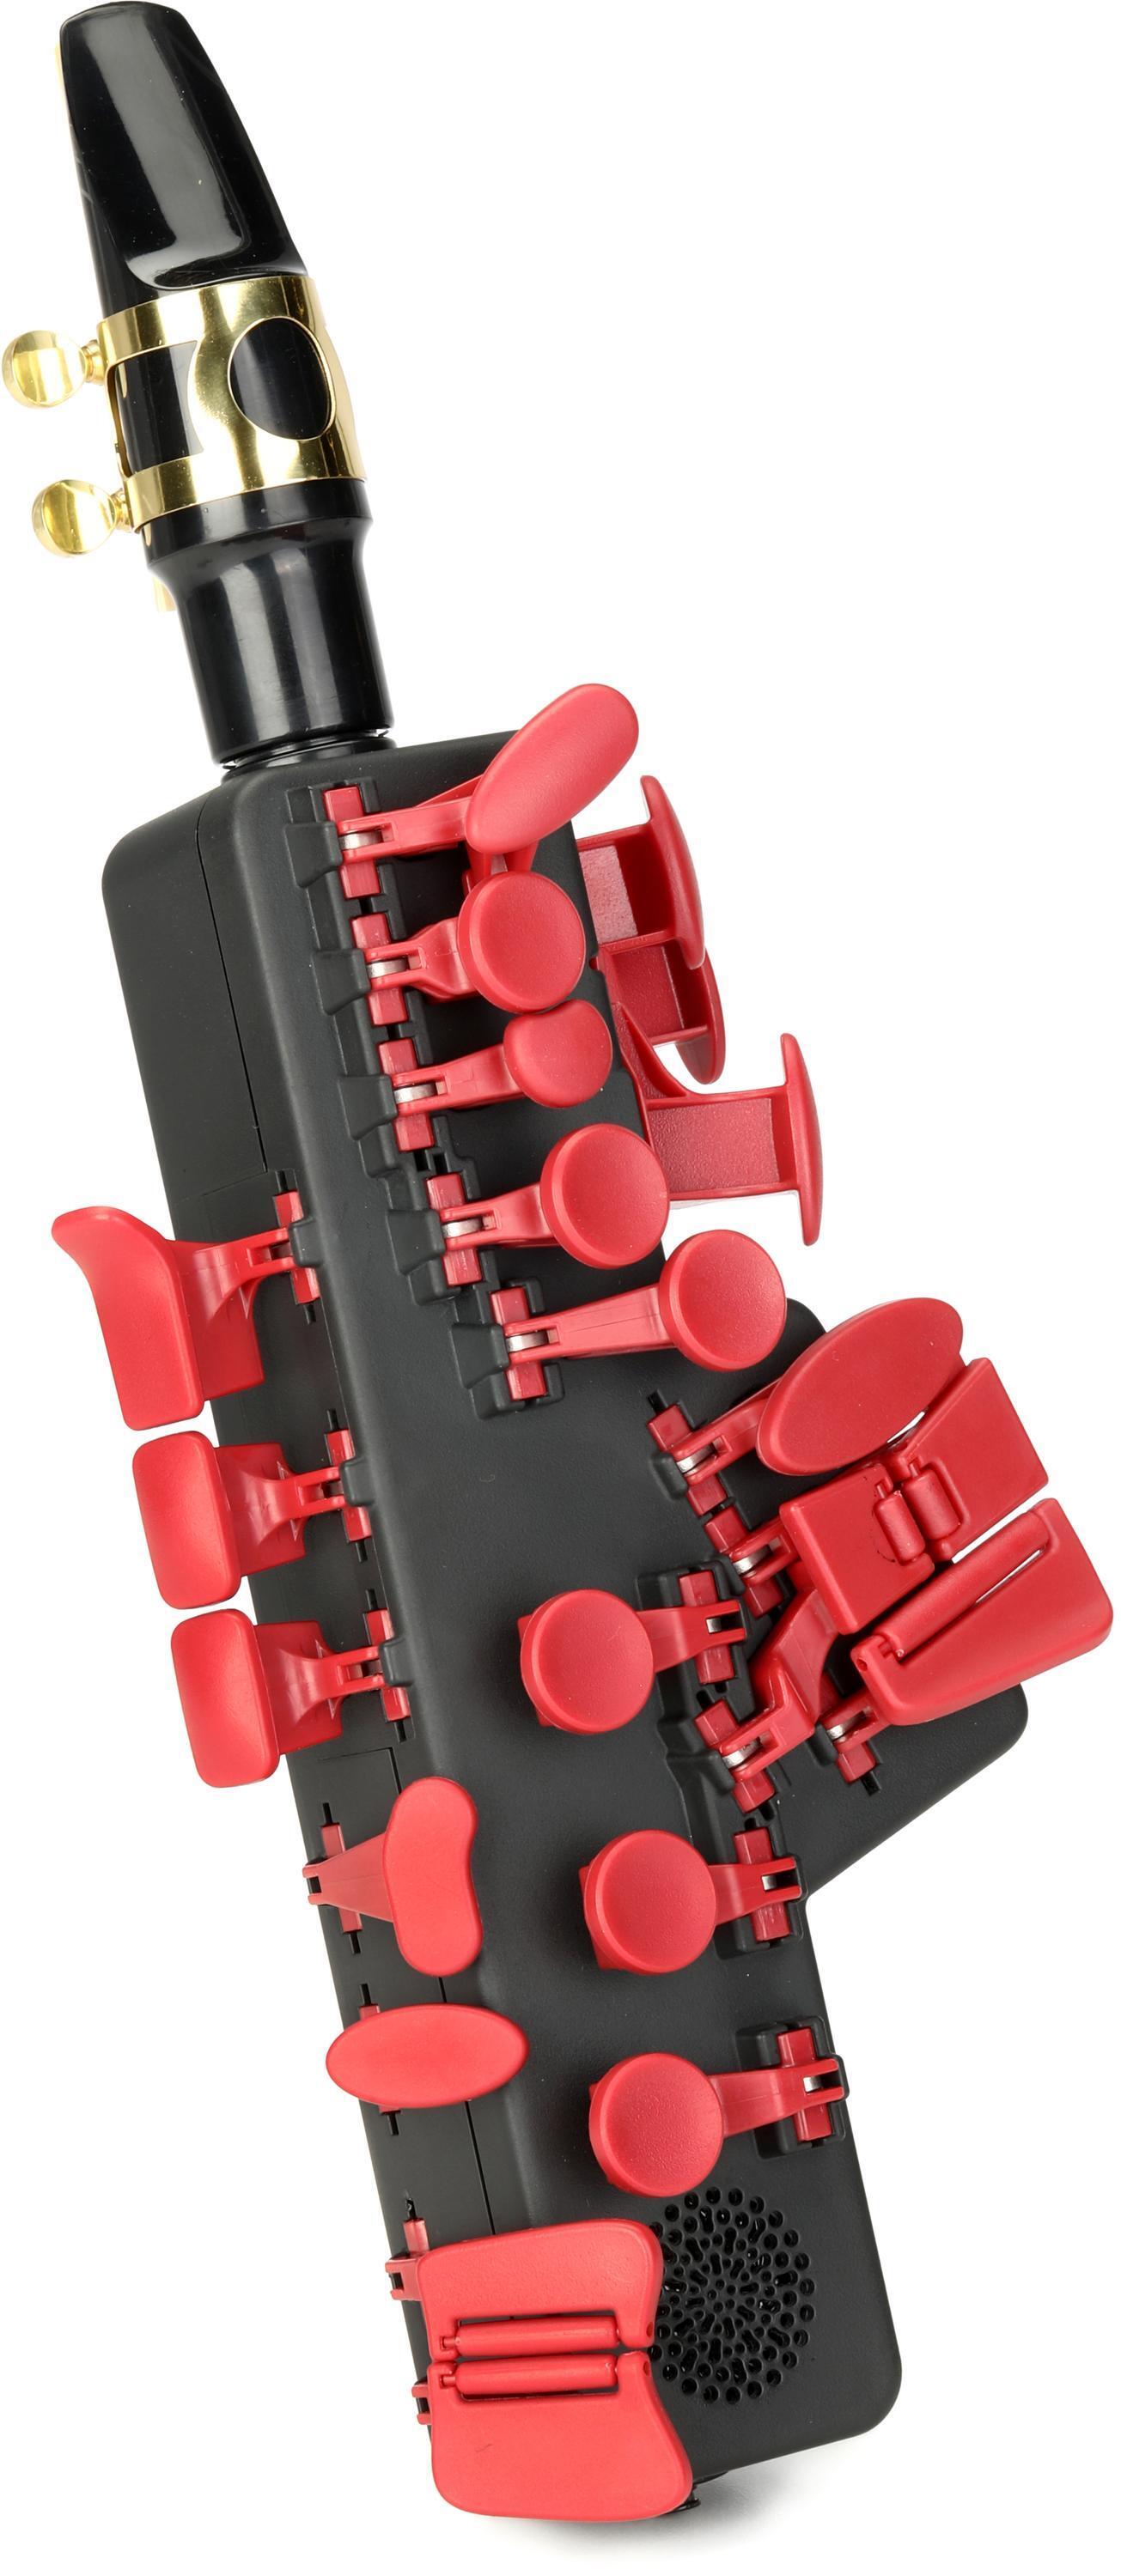 Odisei Music Travel Sax 2 Wind Synth/Controller - Red Brick